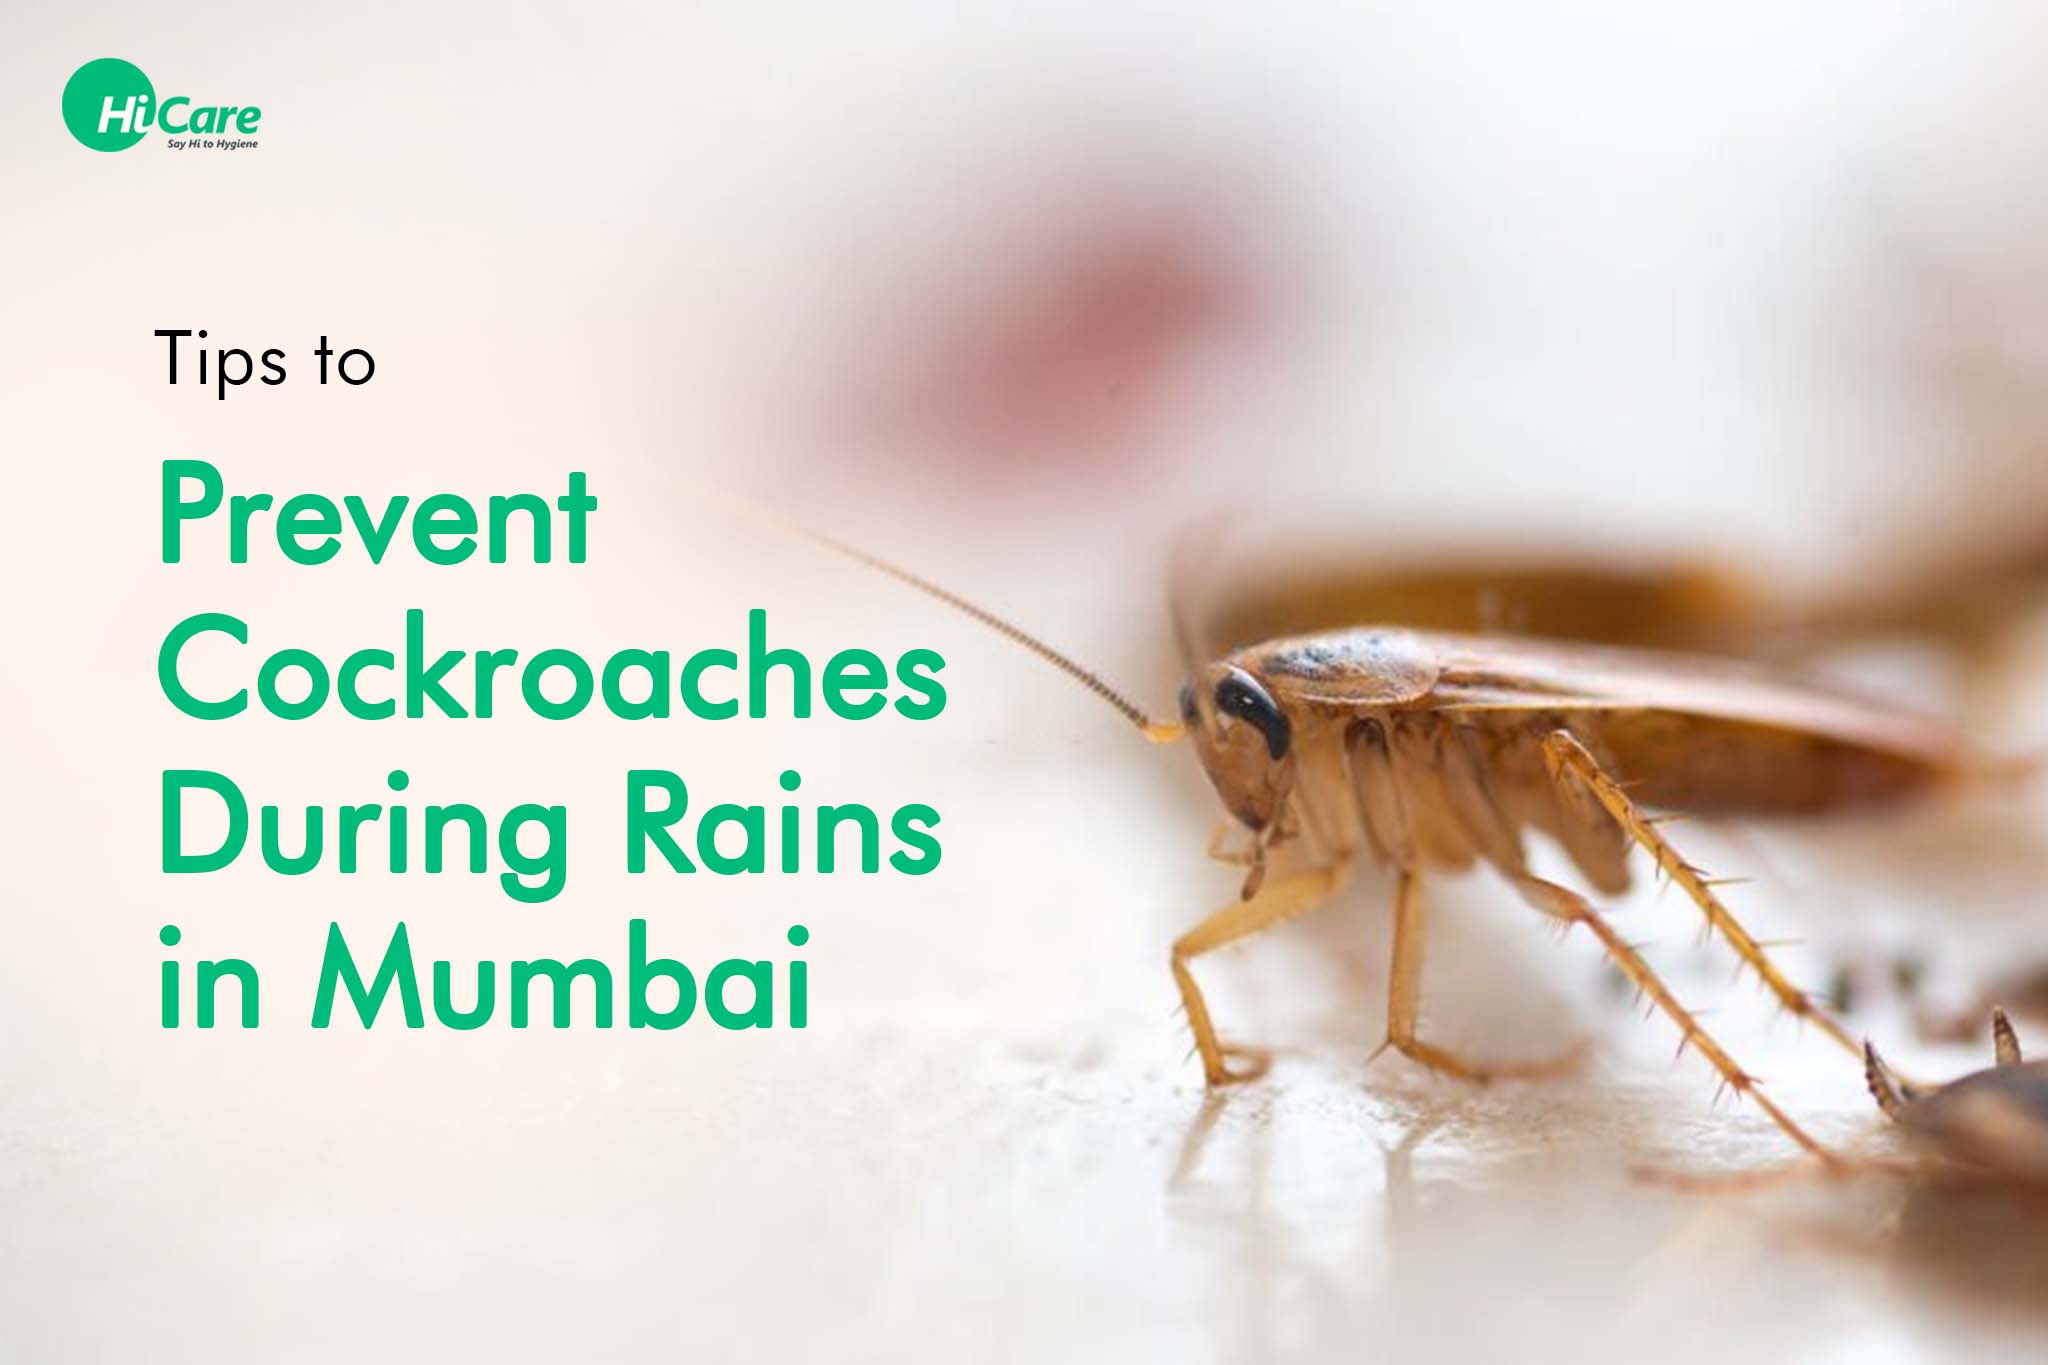 7 Best Tips to Prevent Cockroaches During Rainy Season in Mumbai